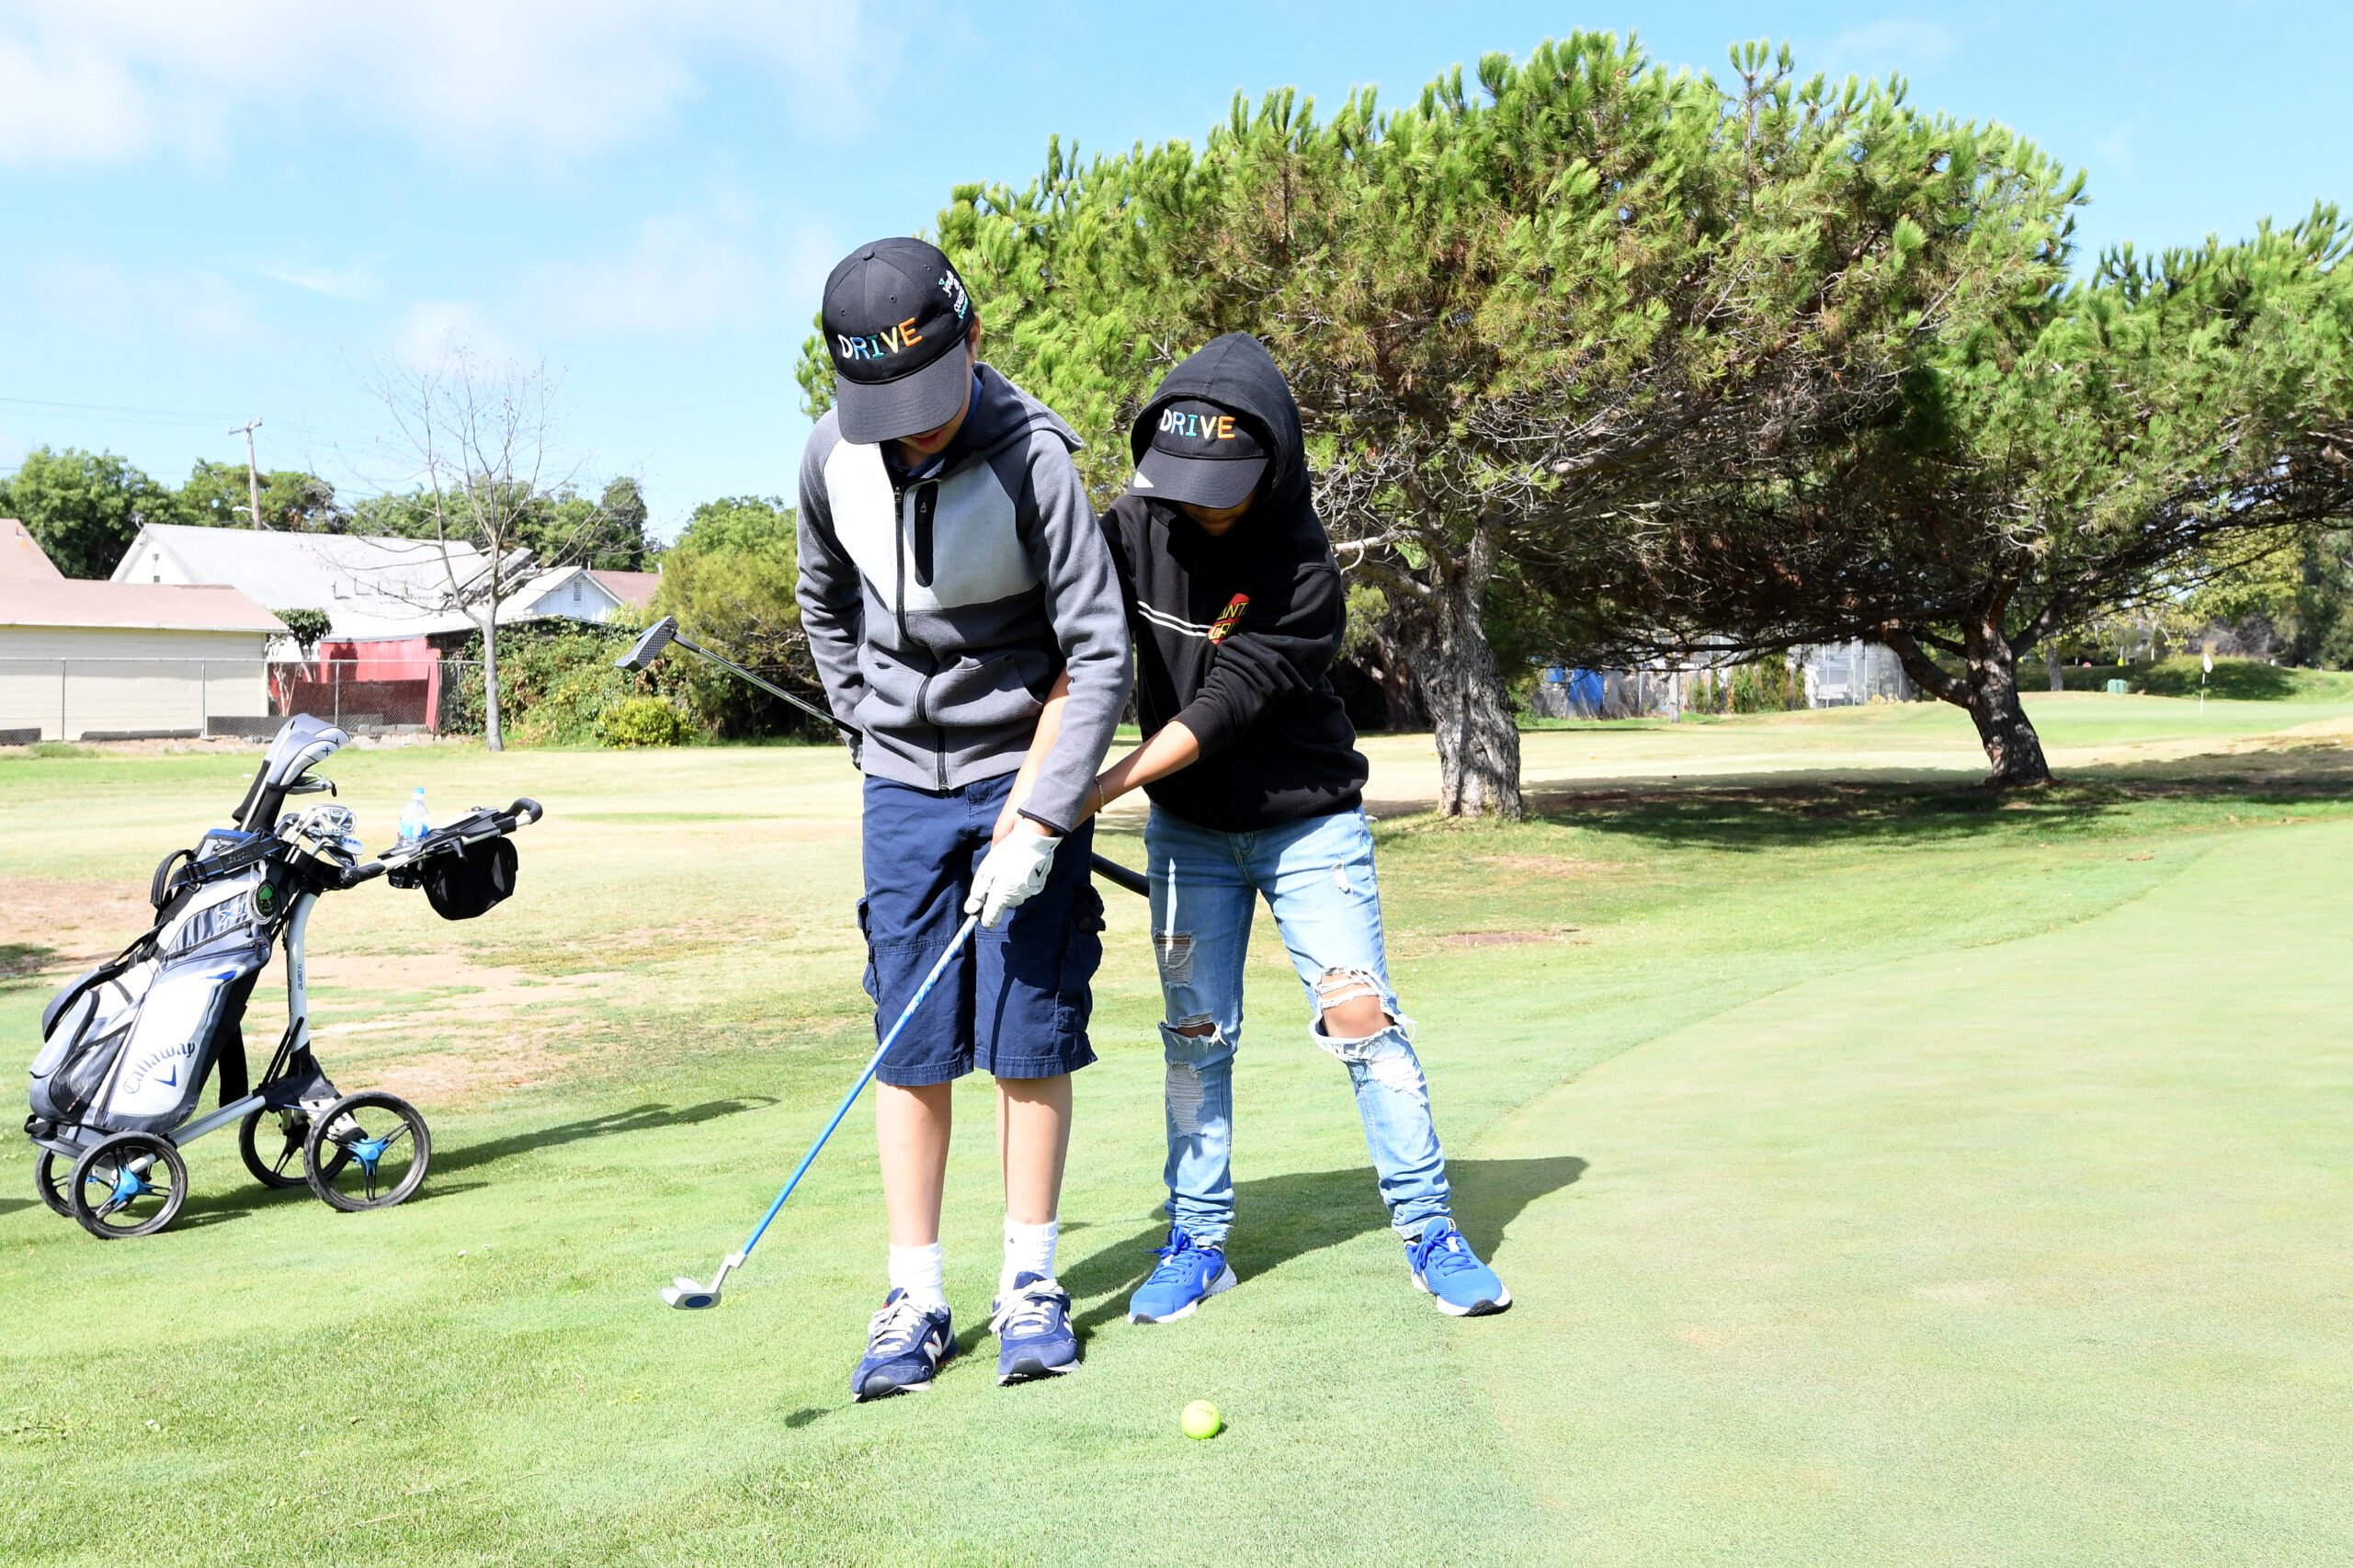 DRIVE Club Guide teaching a new golfer how to swing the club